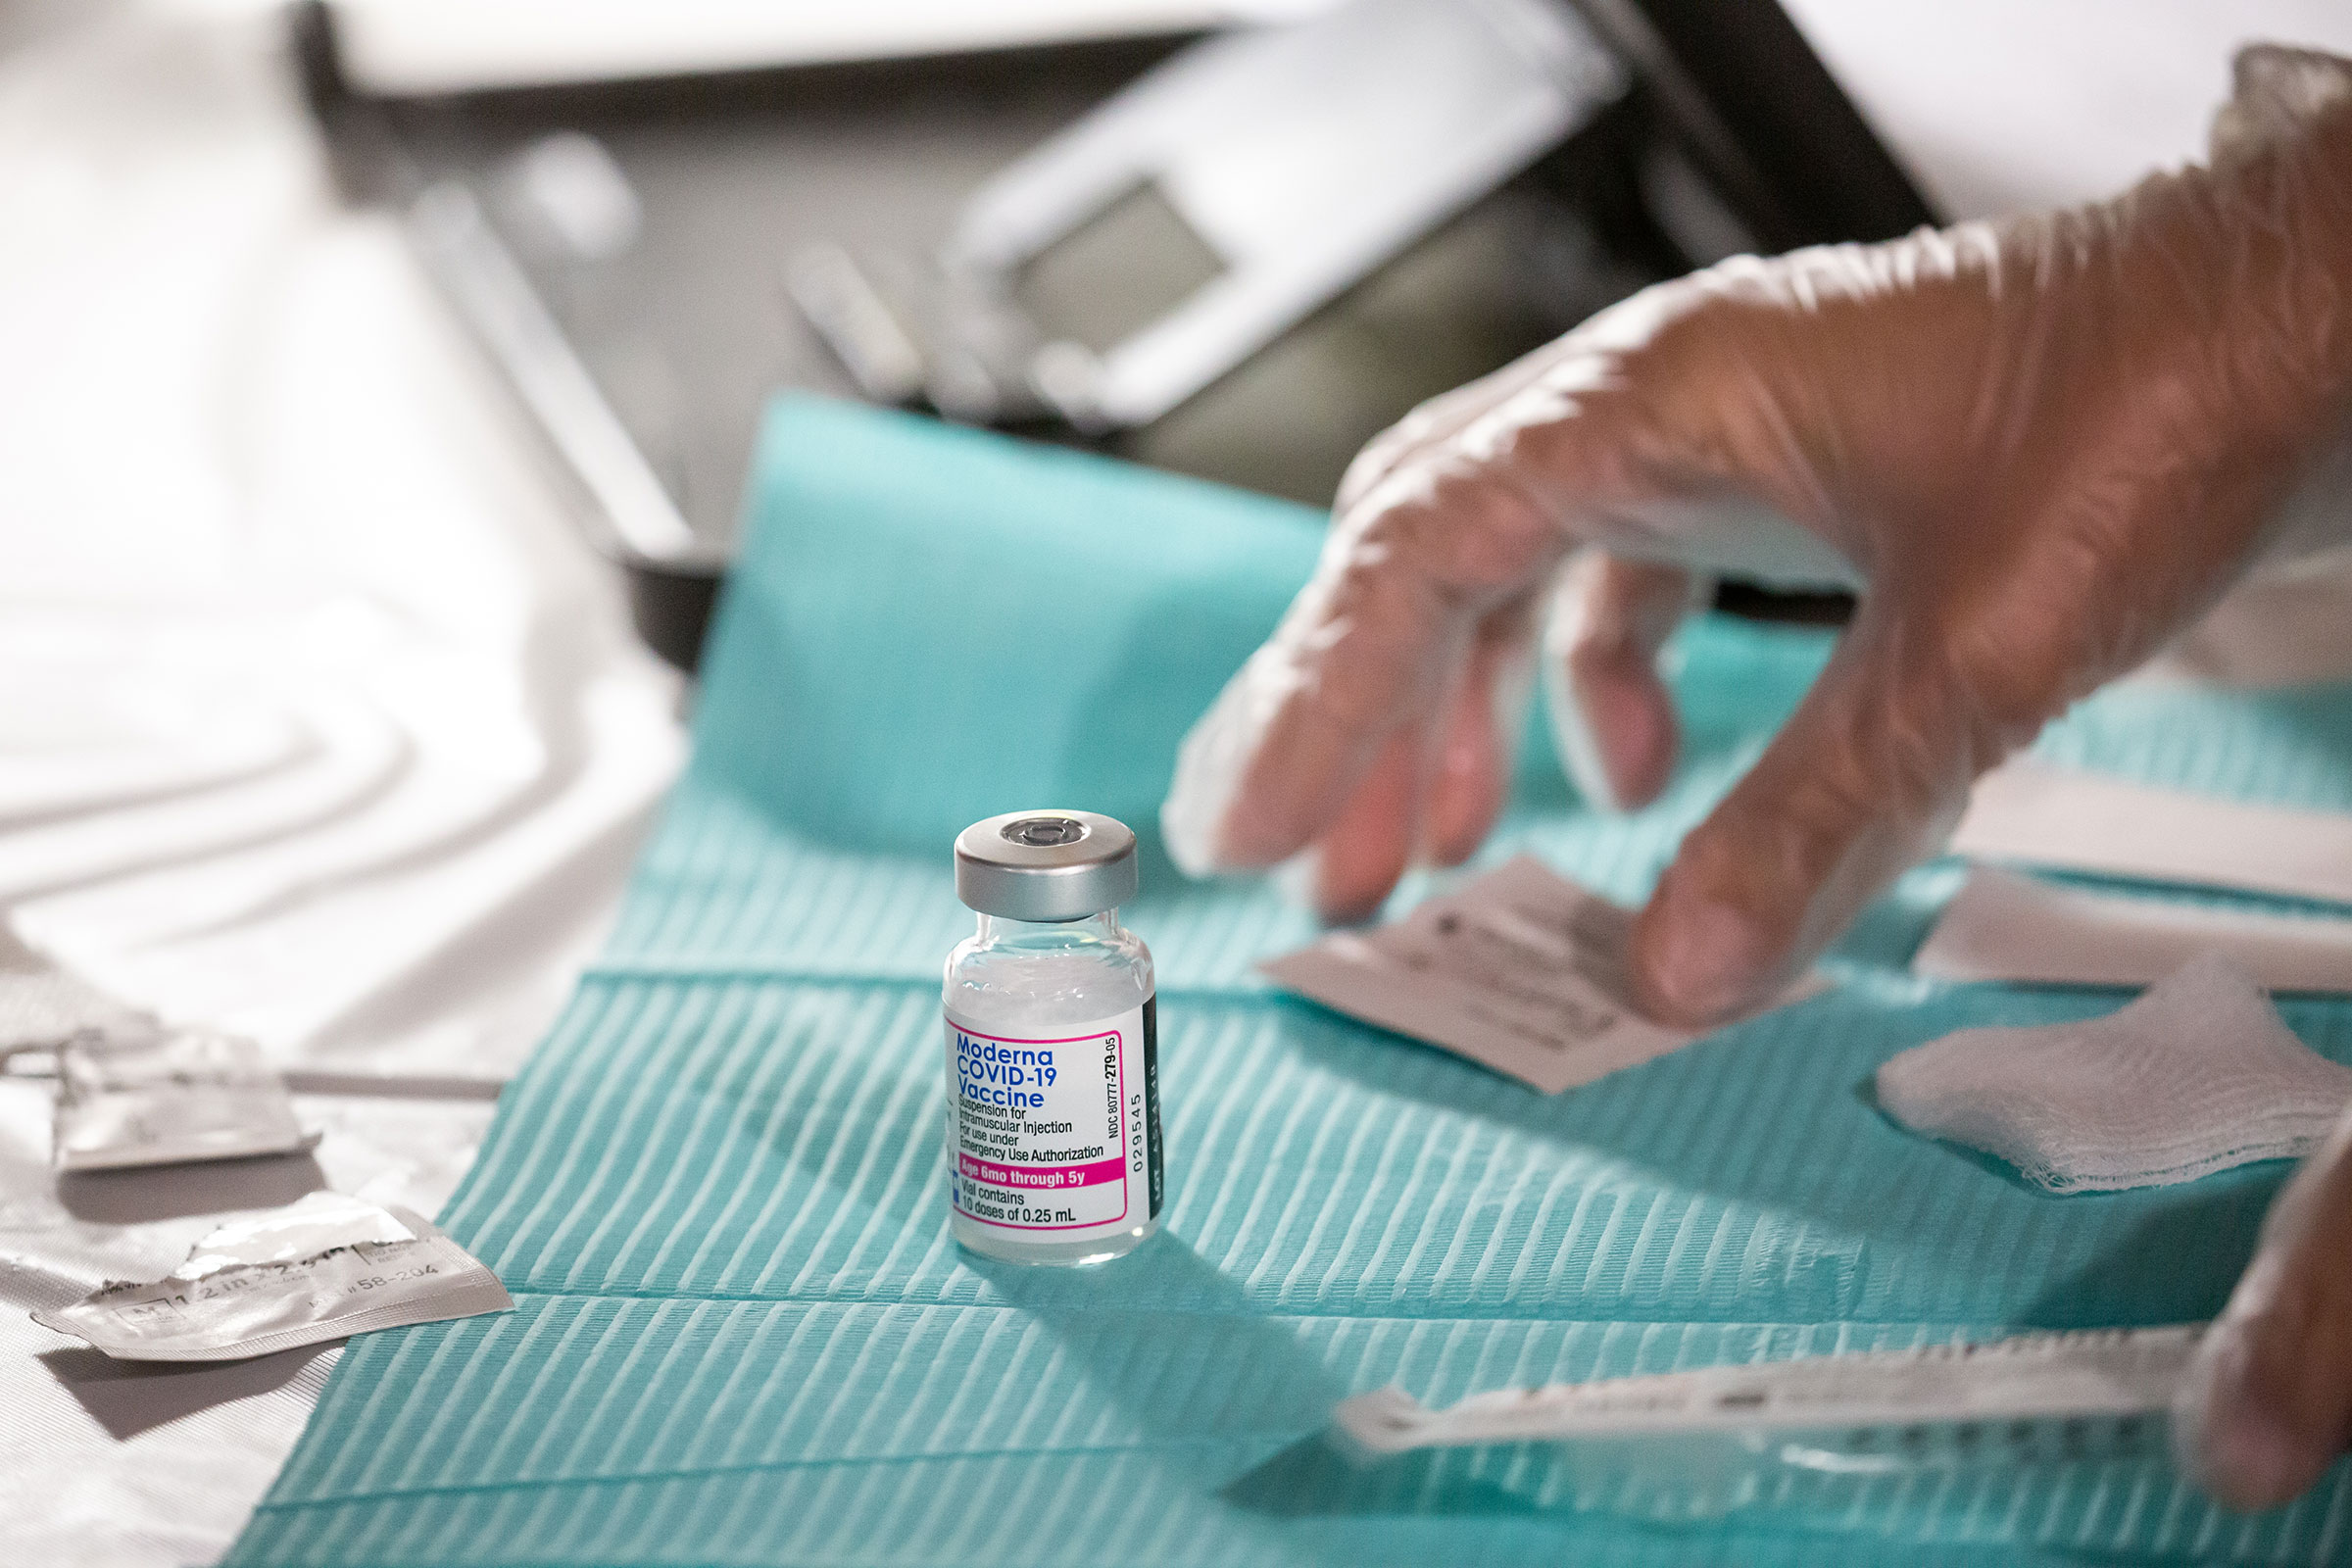 A health care worker prepares a dose of the Moderna COVID-19 vaccine at the Brooklyn Children's Museum vaccination site in New York City on June 23, 2022. (Michael Nagle—Bloomberg/Getty Images)